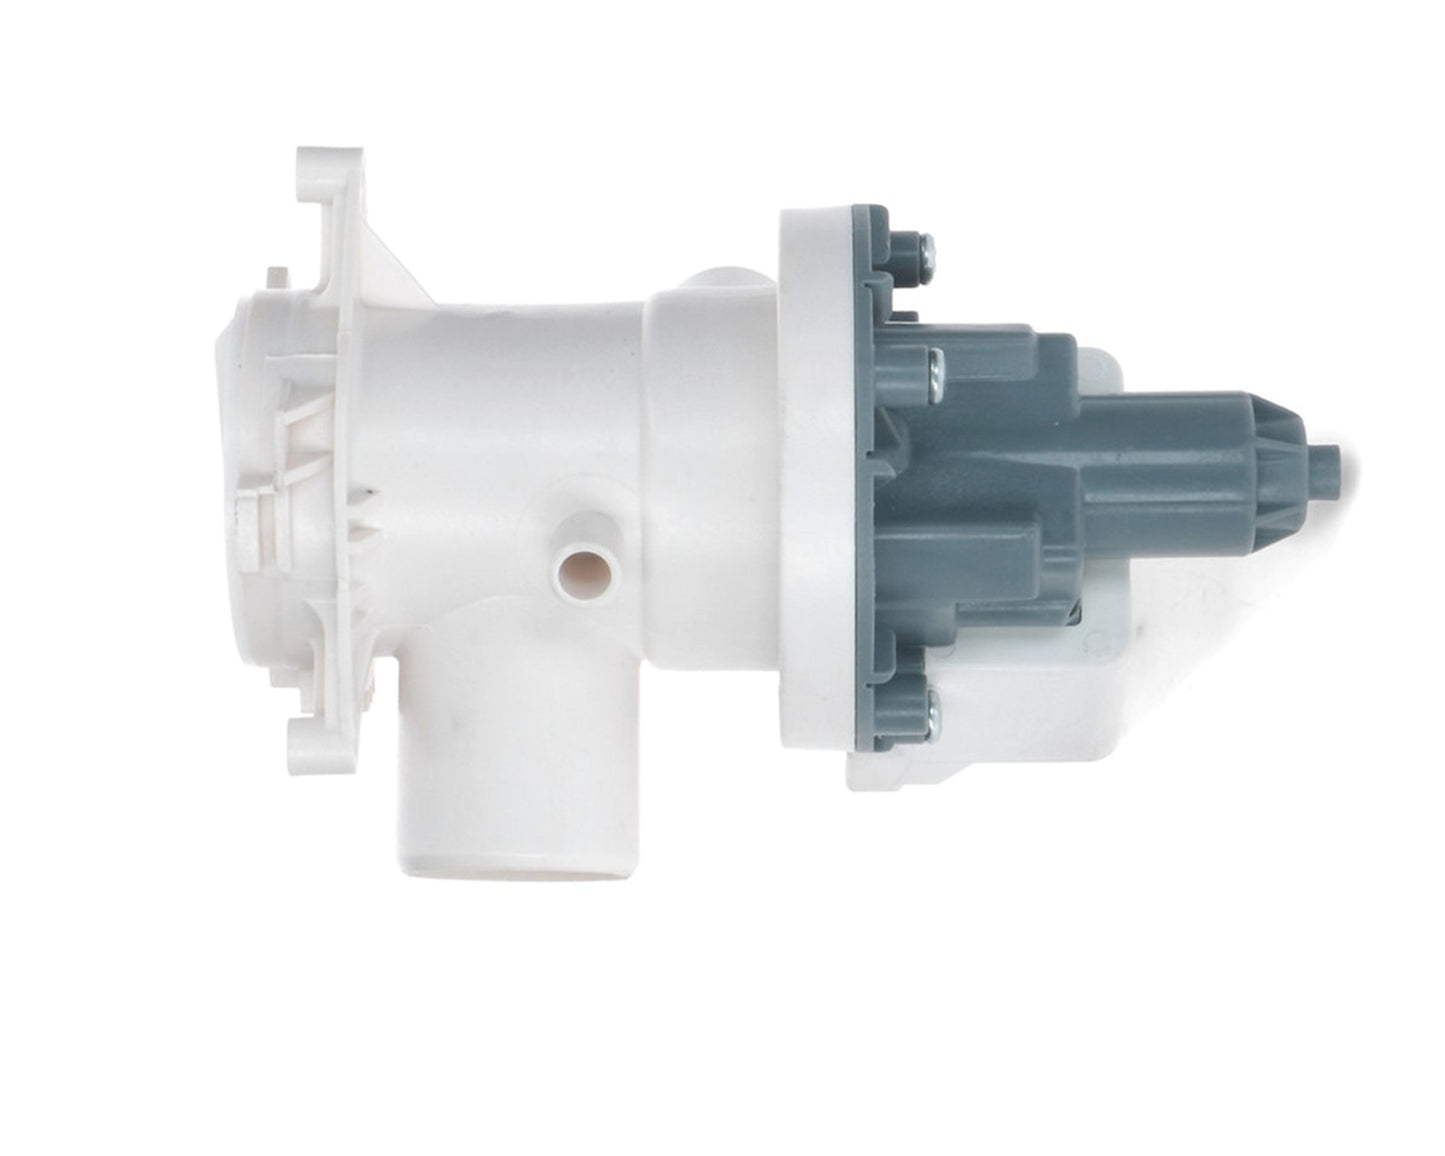 Washing Machine Drain Pump & Filter Assembly for Smeg LB610E, LB712E, LBS105F, LBS106F2, LBS108F, LBS108F1, SW127D, SW128D, SW85